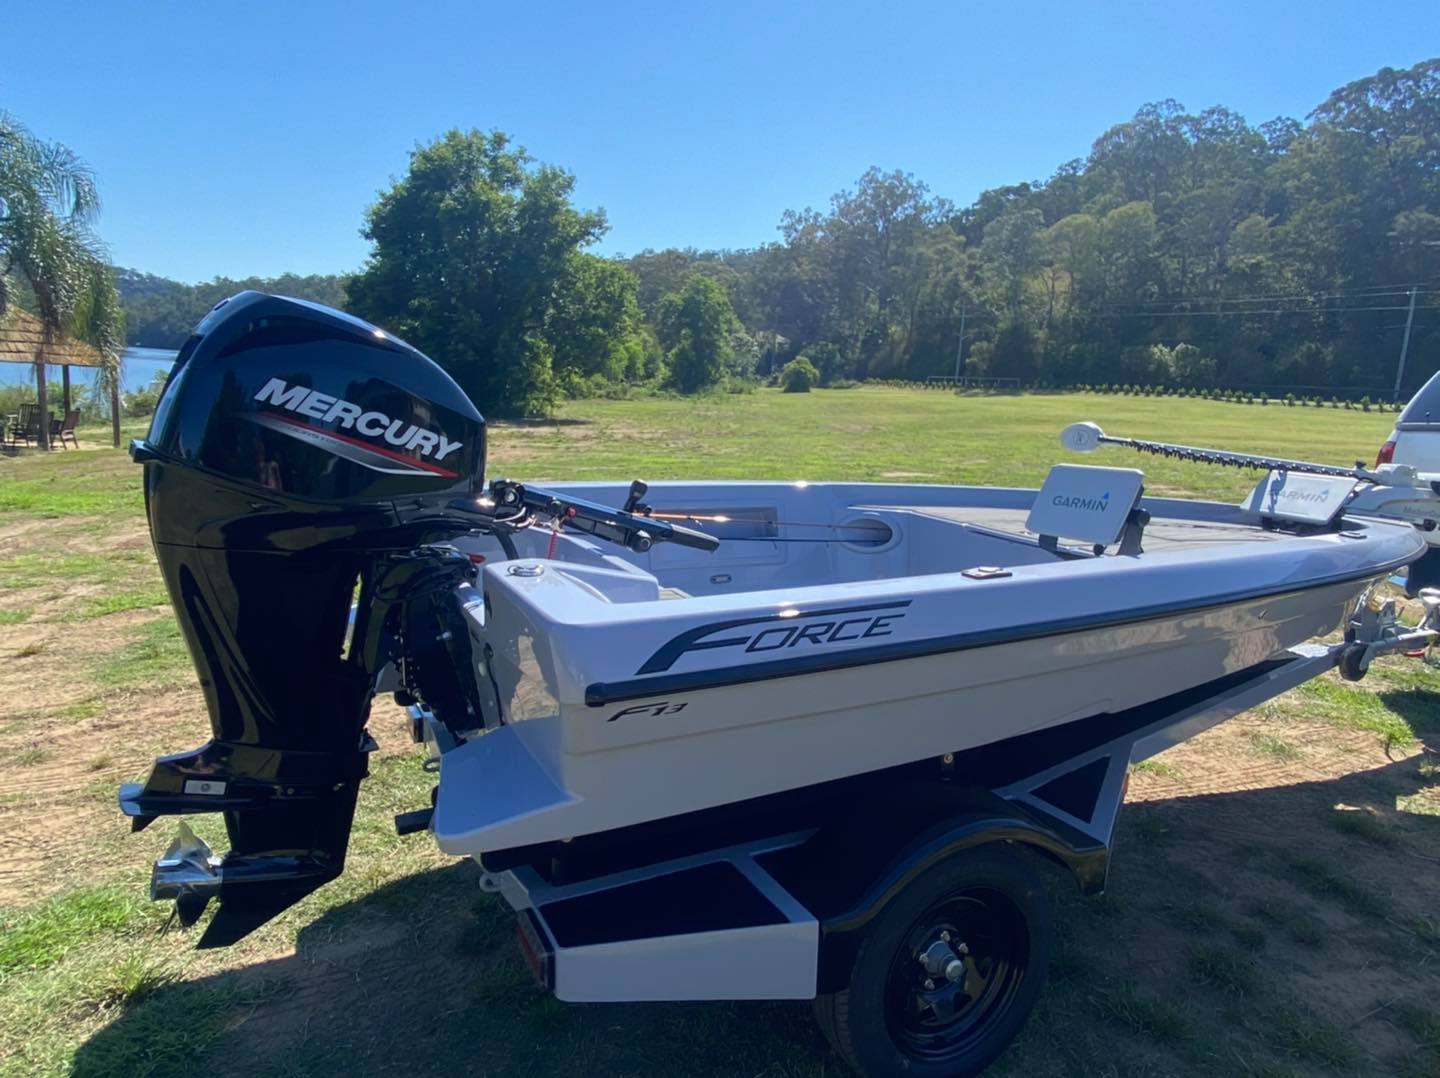 We are super proud of our First Force F13 Fisher on its very own, Force Custom Trailer.  Fitted out with all the latest gadgets, Mercury 4 stroke 40hp engine with WIFI Vessel View Mobile, Motor Guide, Live fish Well and Rod Storage, this is a fisher’s dream 🎣